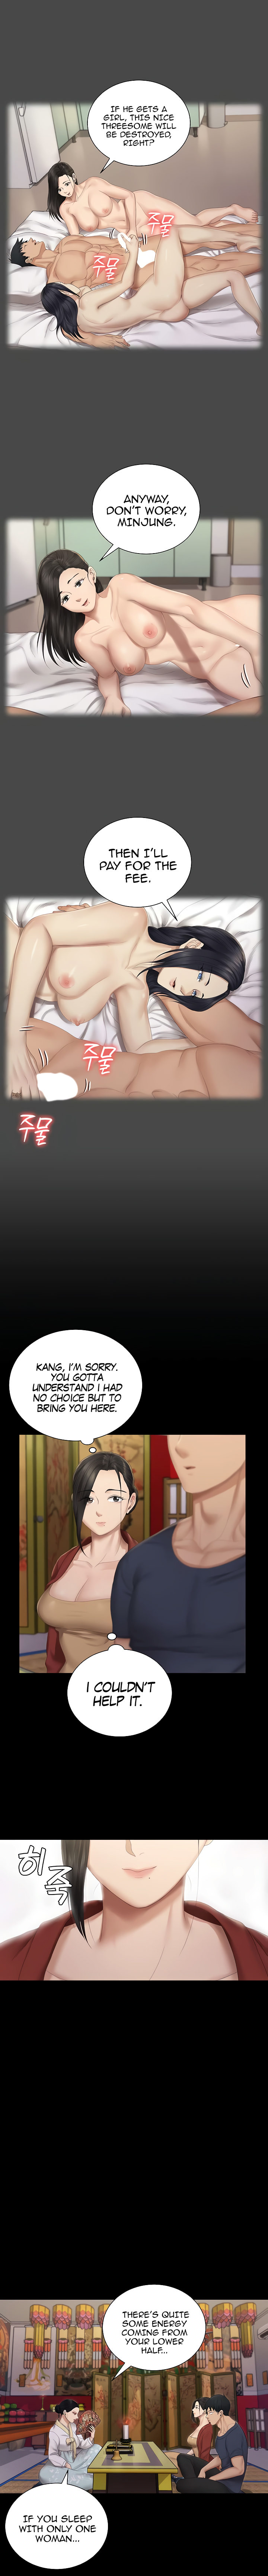 Read Manhwa his-place, Read Manga his-place Online